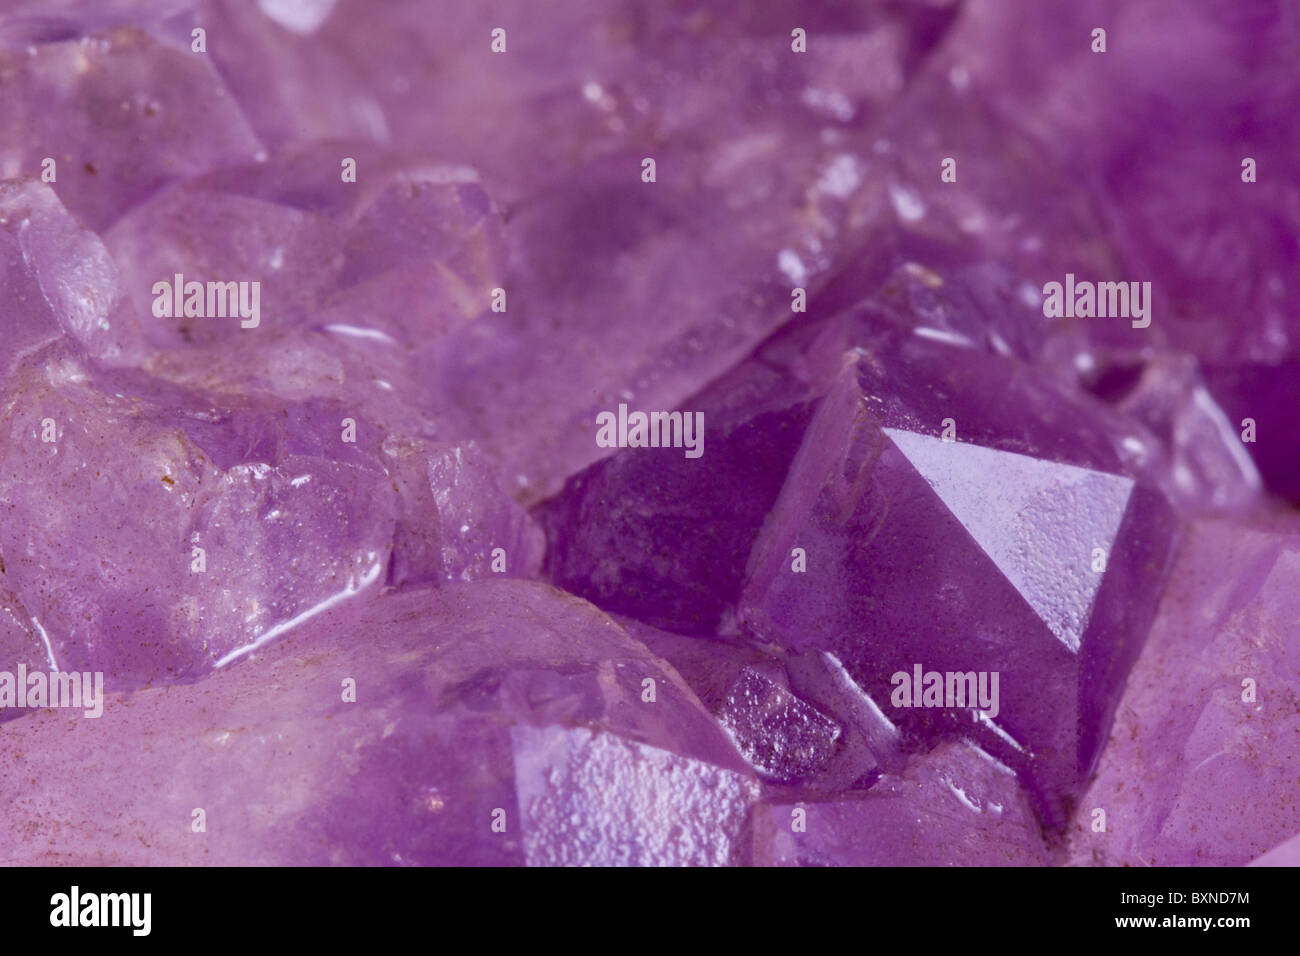 close-up of amethyst crystals Stock Photo